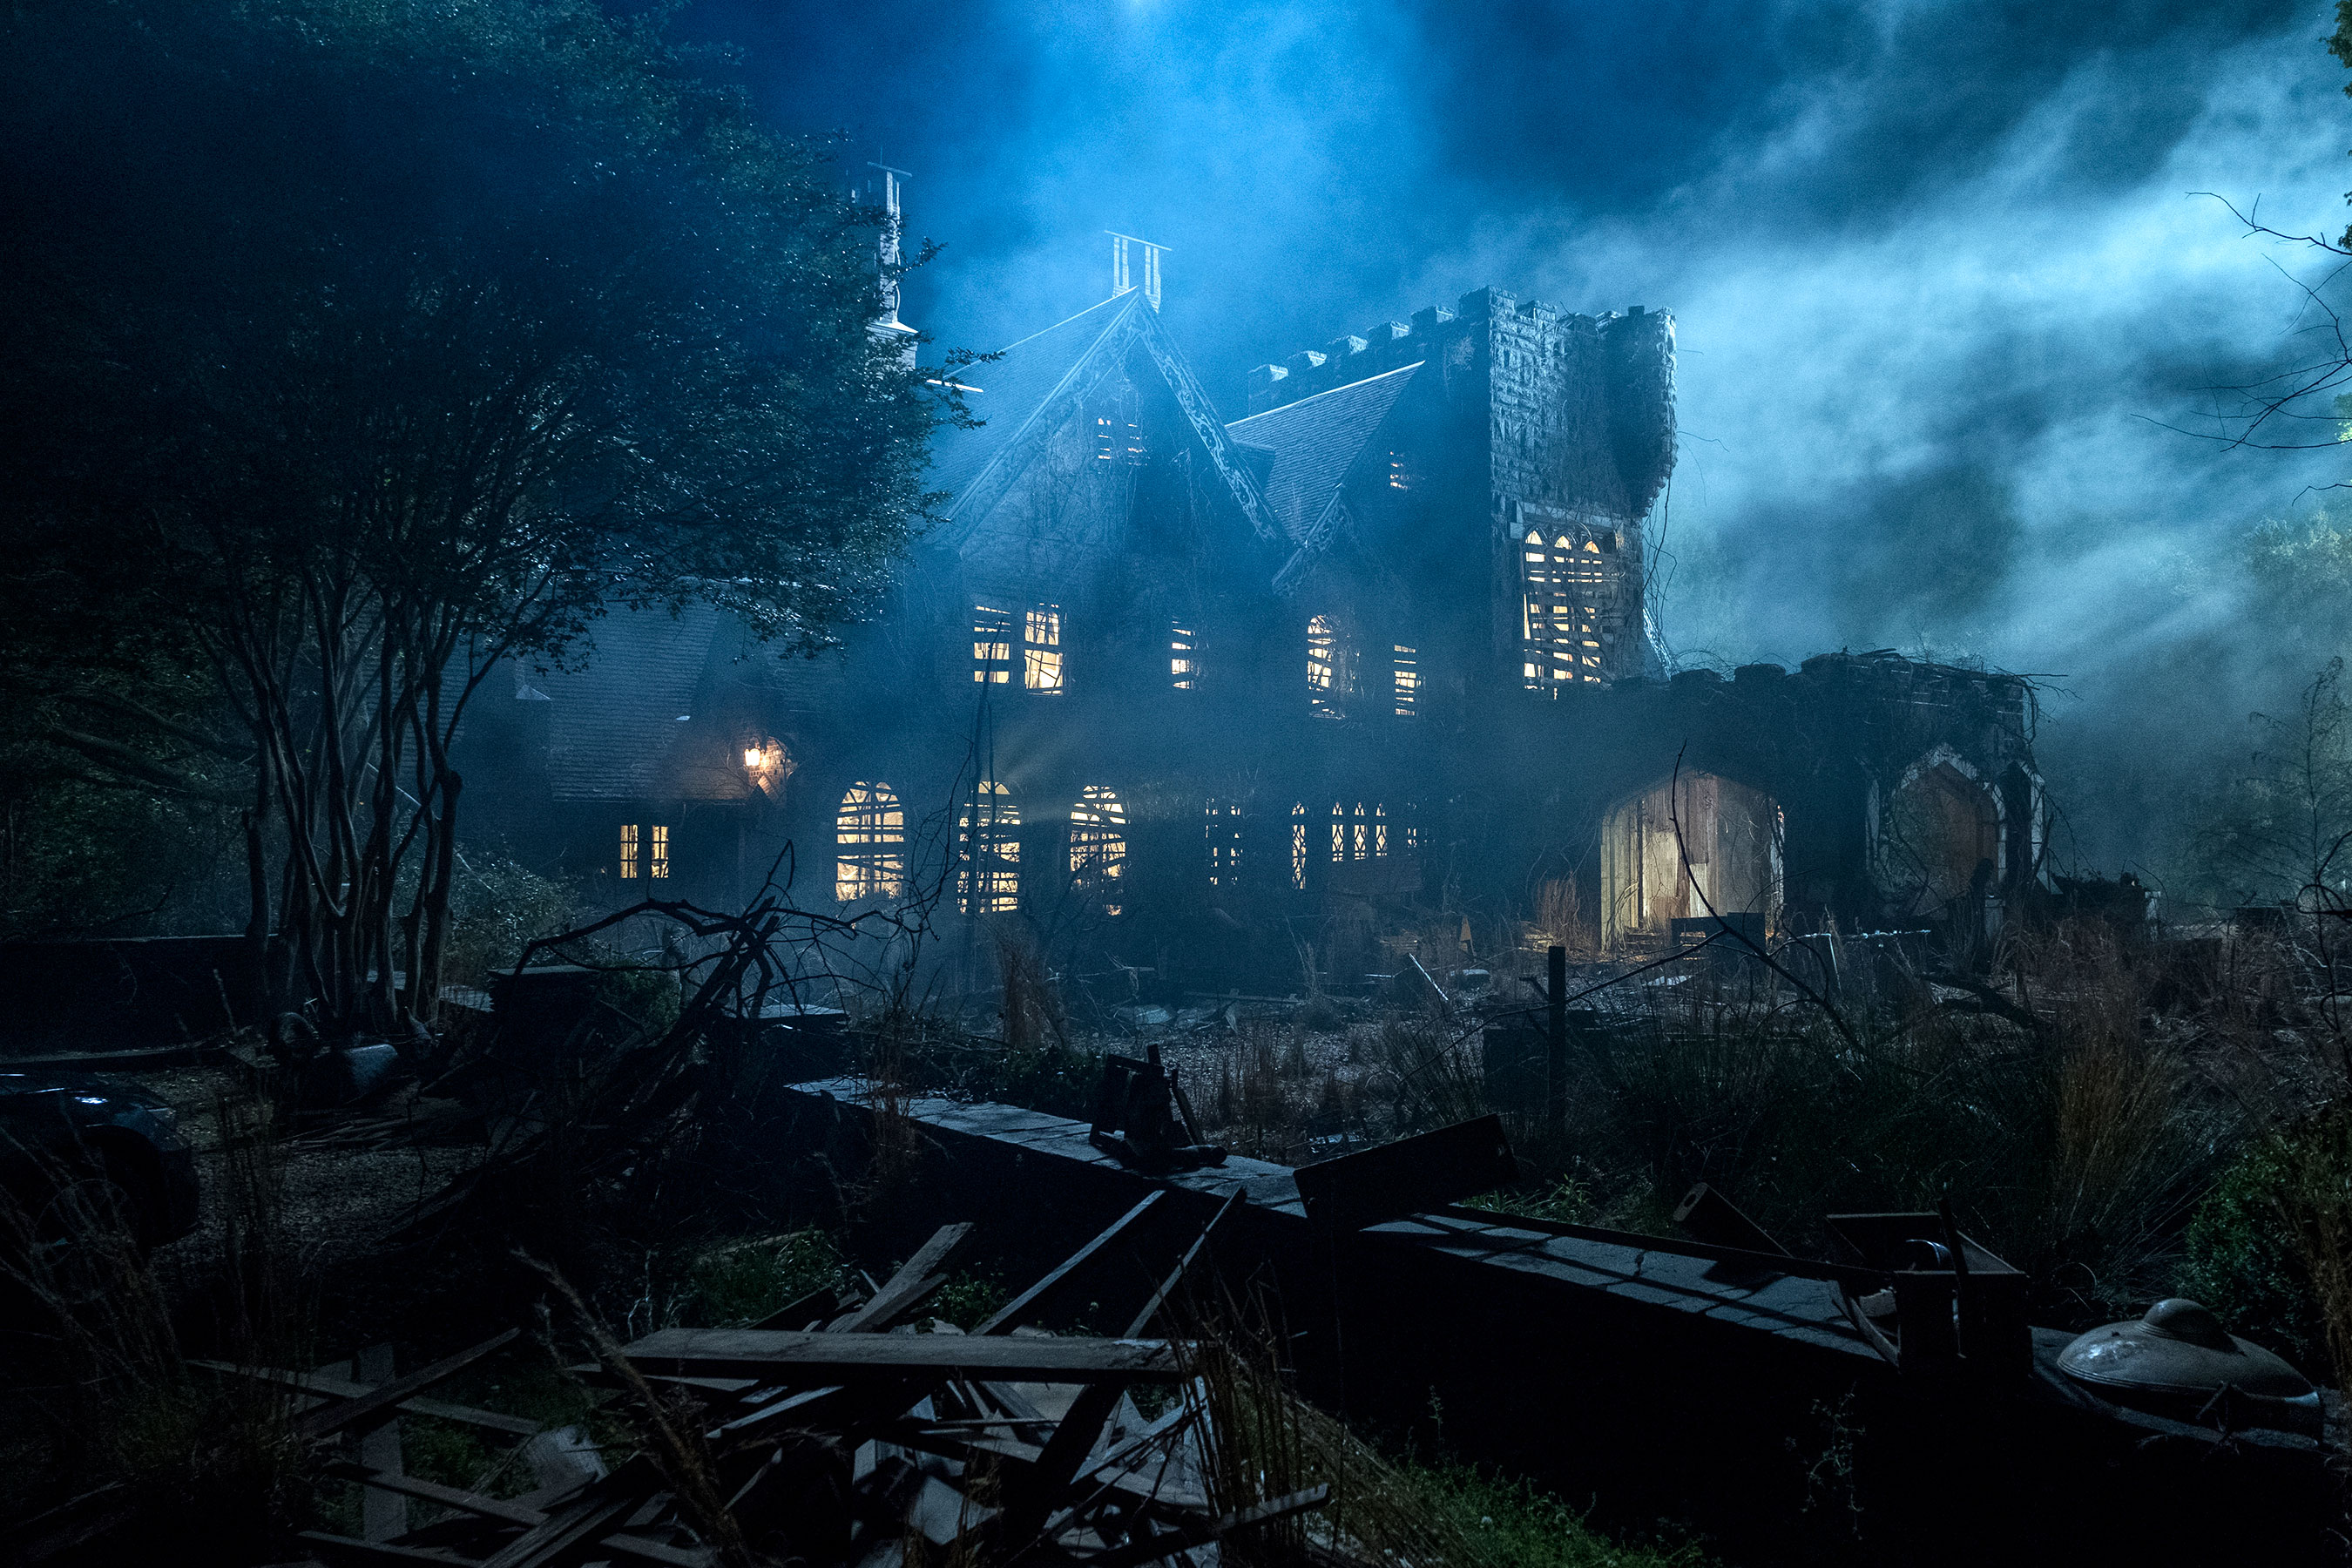 Netflixs The Haunting of Hill House reveals first images 2700x1800